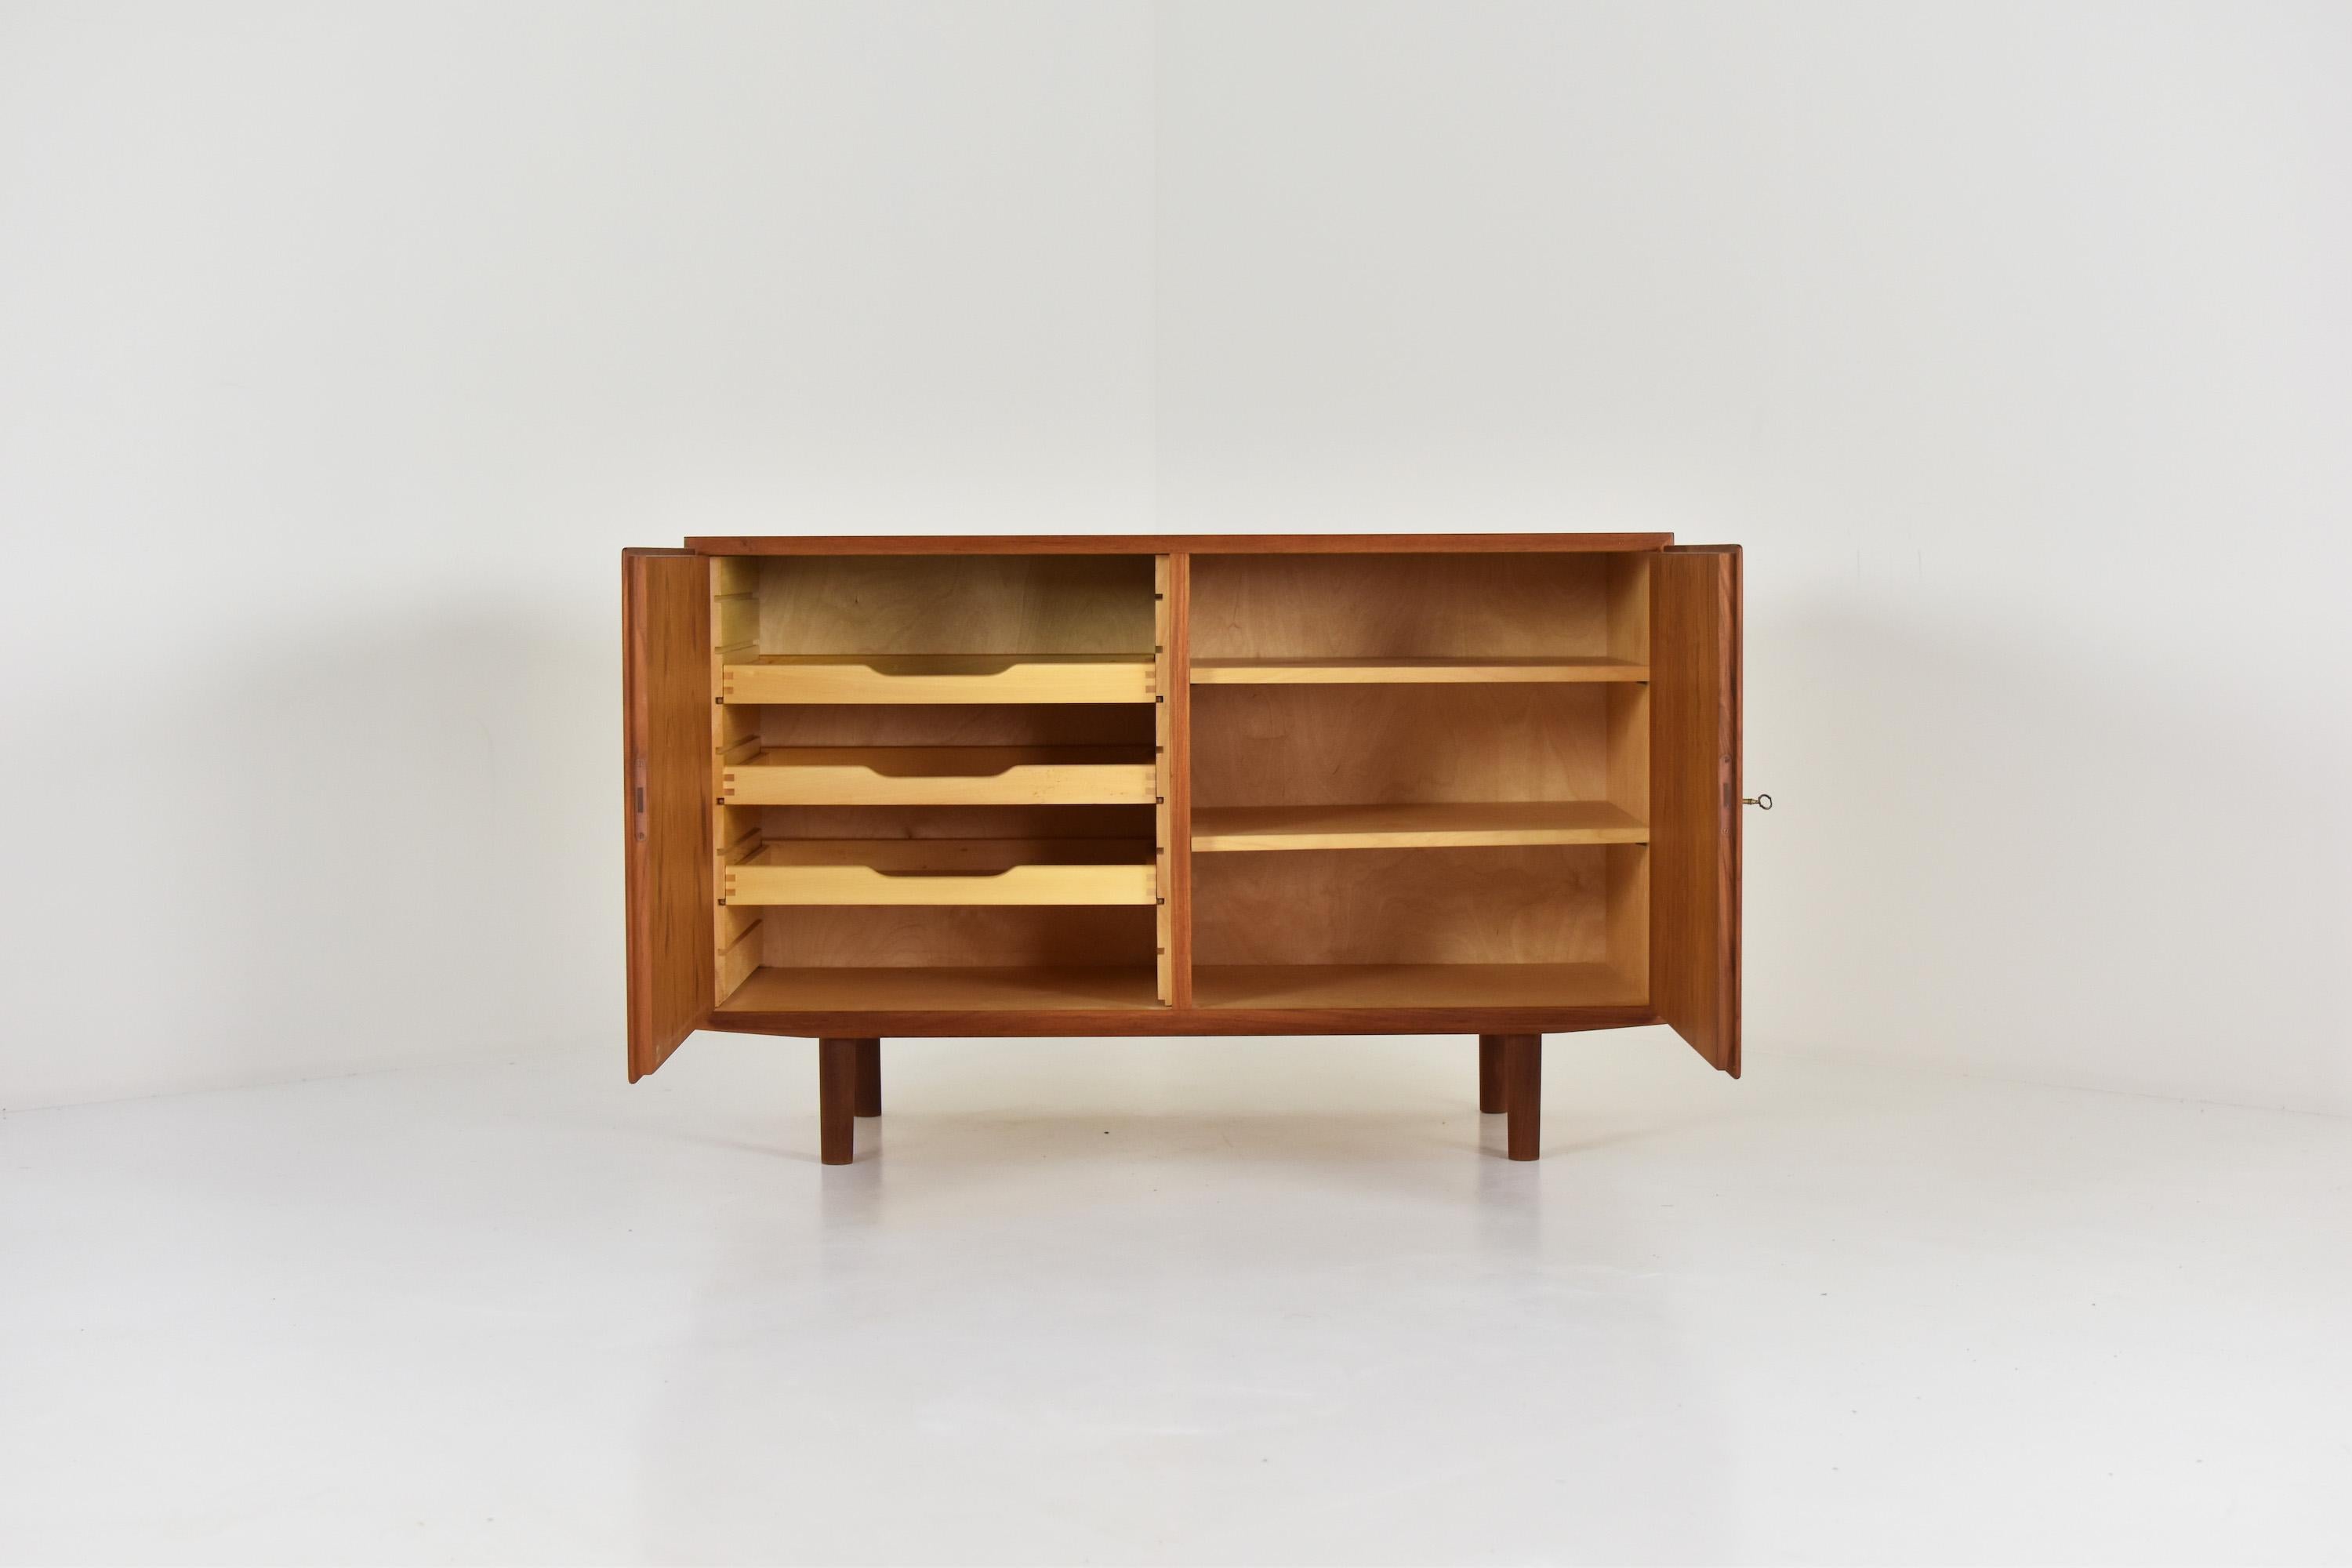 Cabinet in teak by Poul Hundevad for Hundevad & Co, Denmark, 1950s. This cabinet features two sections covering shelves and drawers. Restored with love. Labeled.